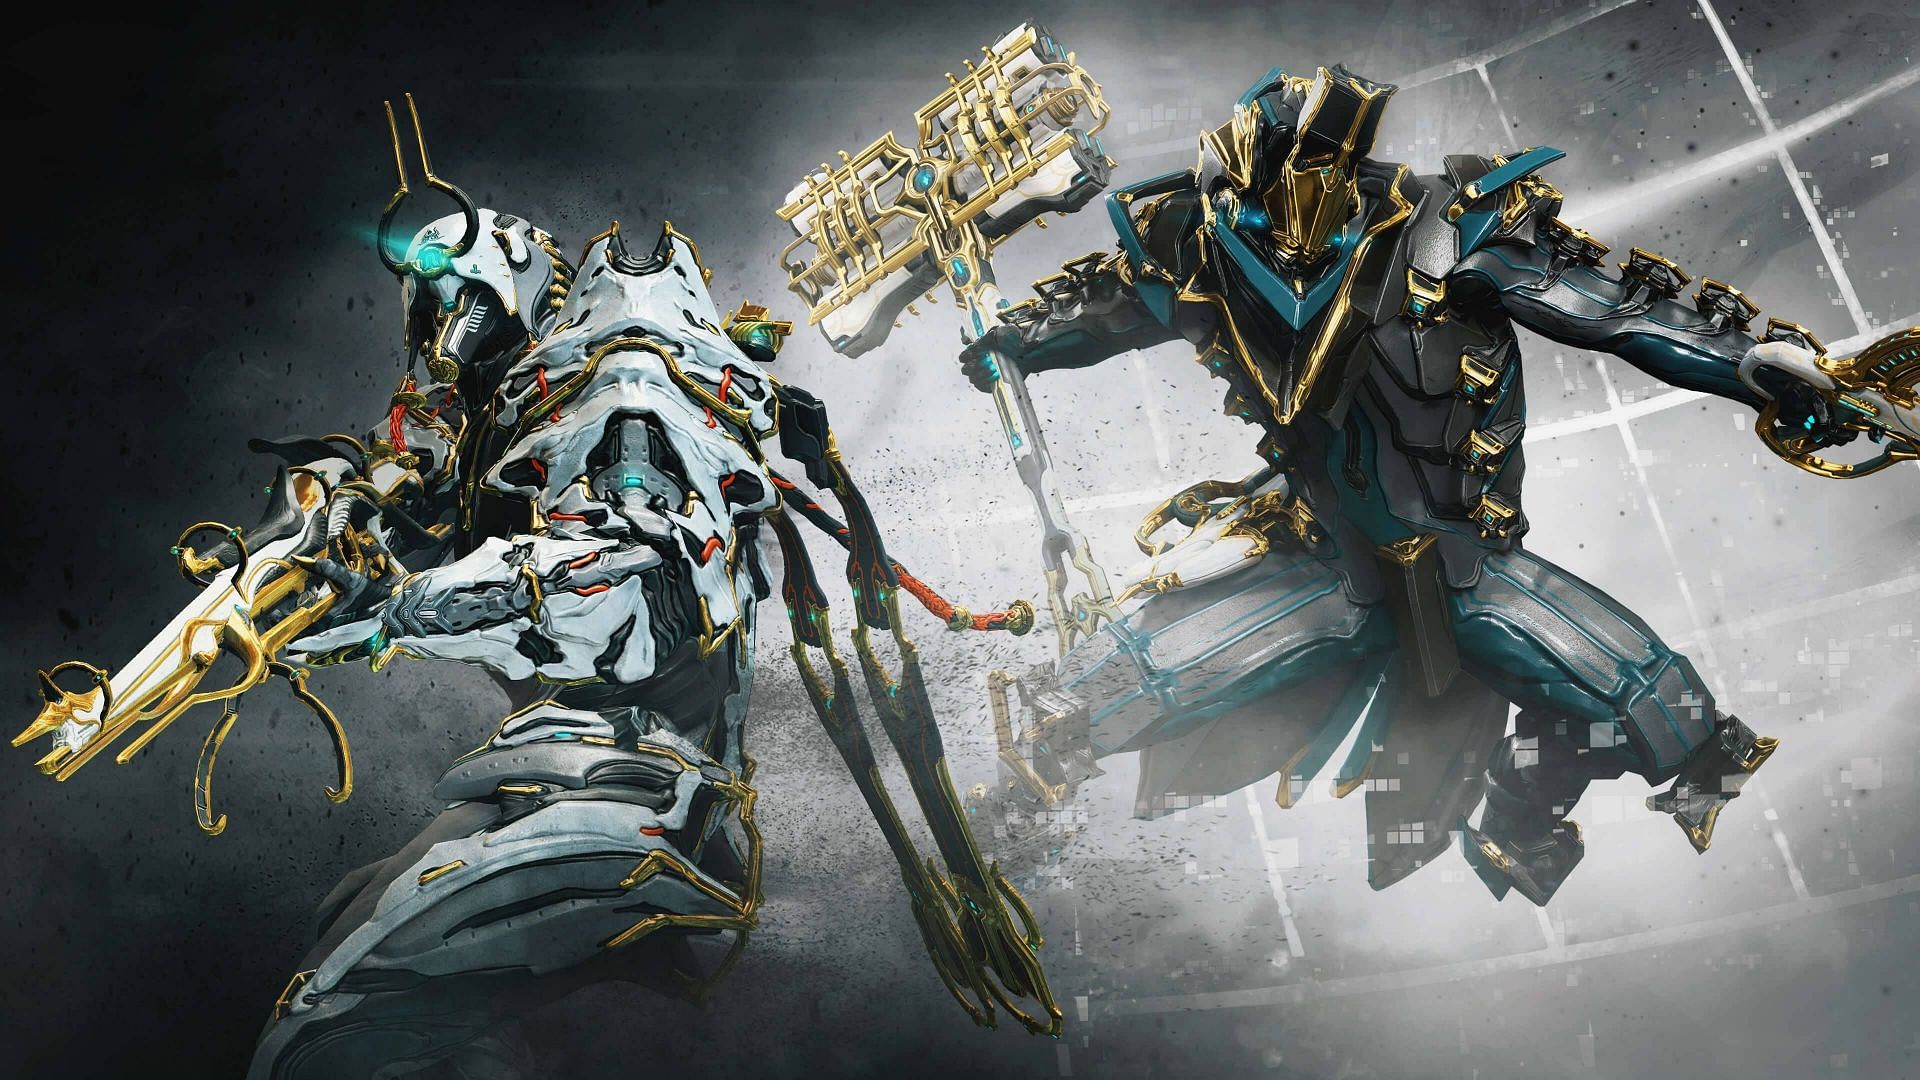 The build variety in Warframe leaves a lot of room for minmaxing (image via Digital Extremes)